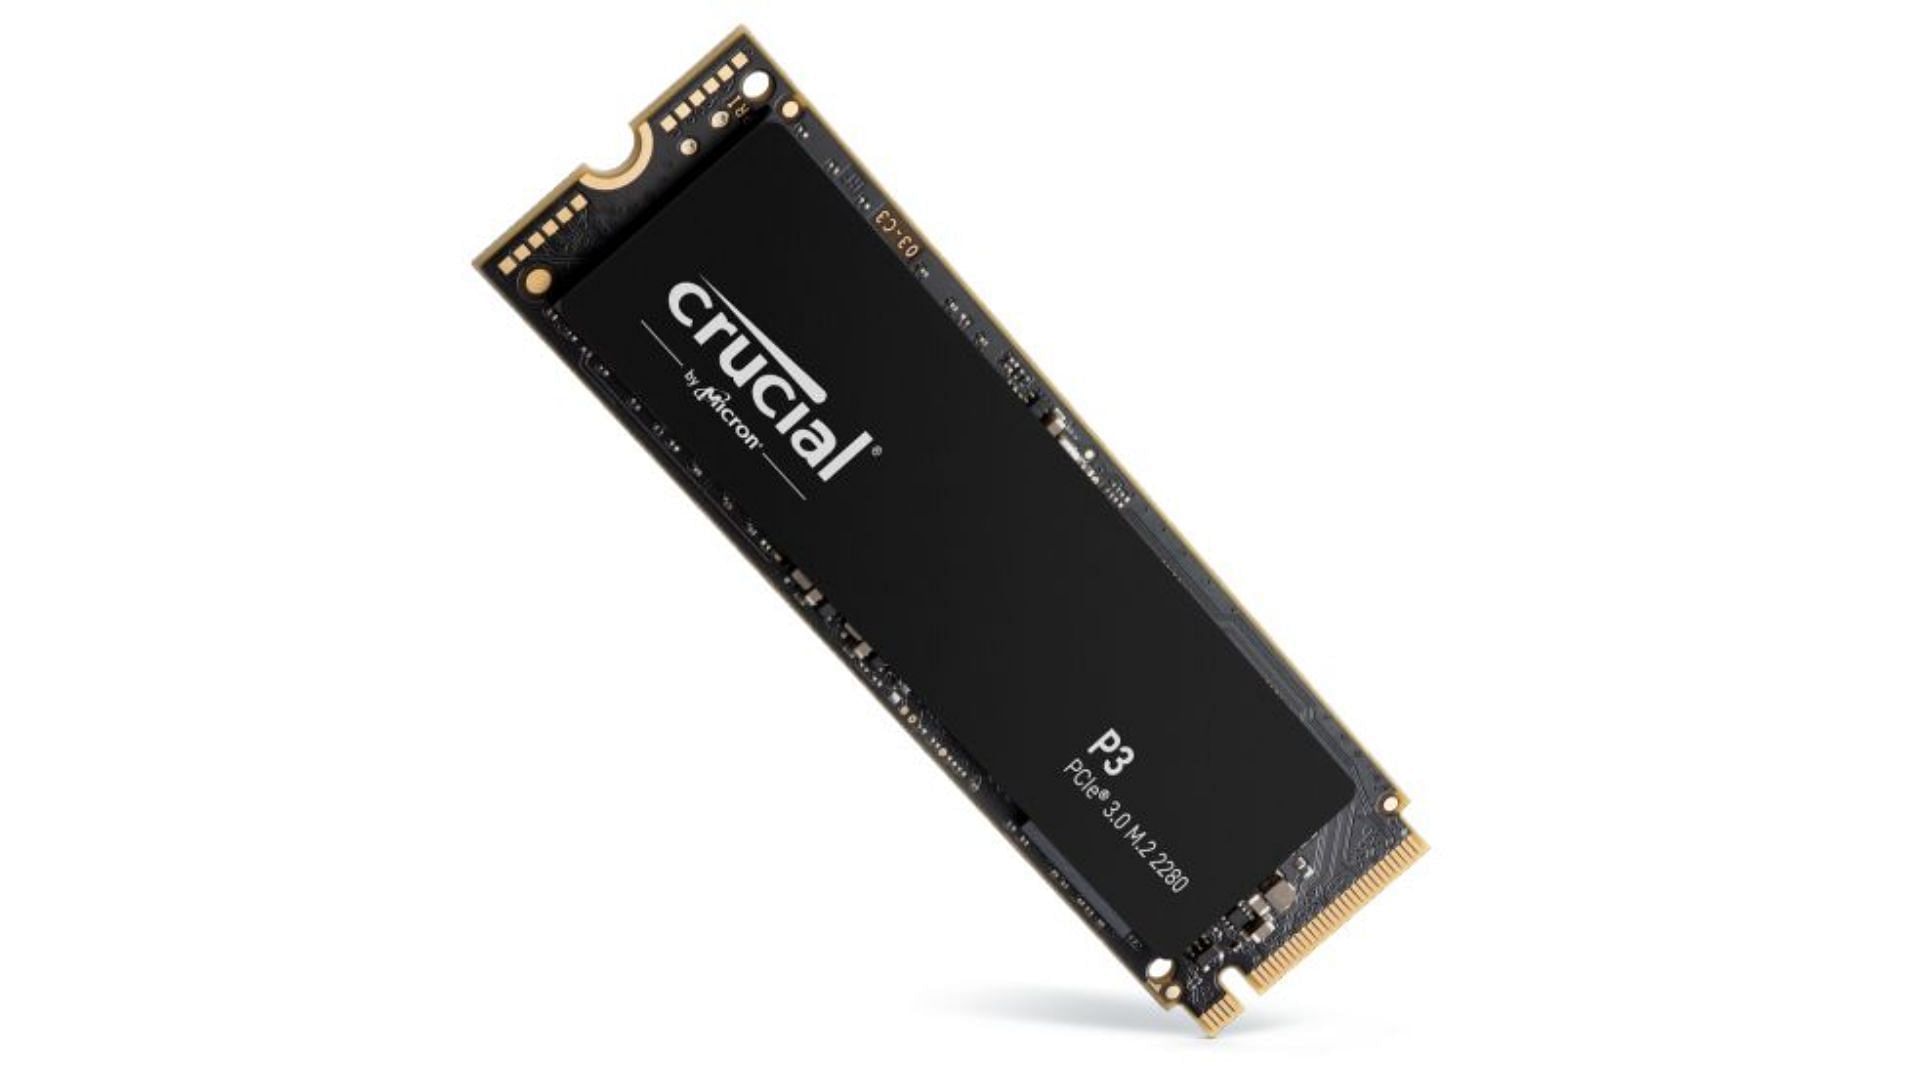 The Crucial P3 NVMe SSD (Image via Crucial)